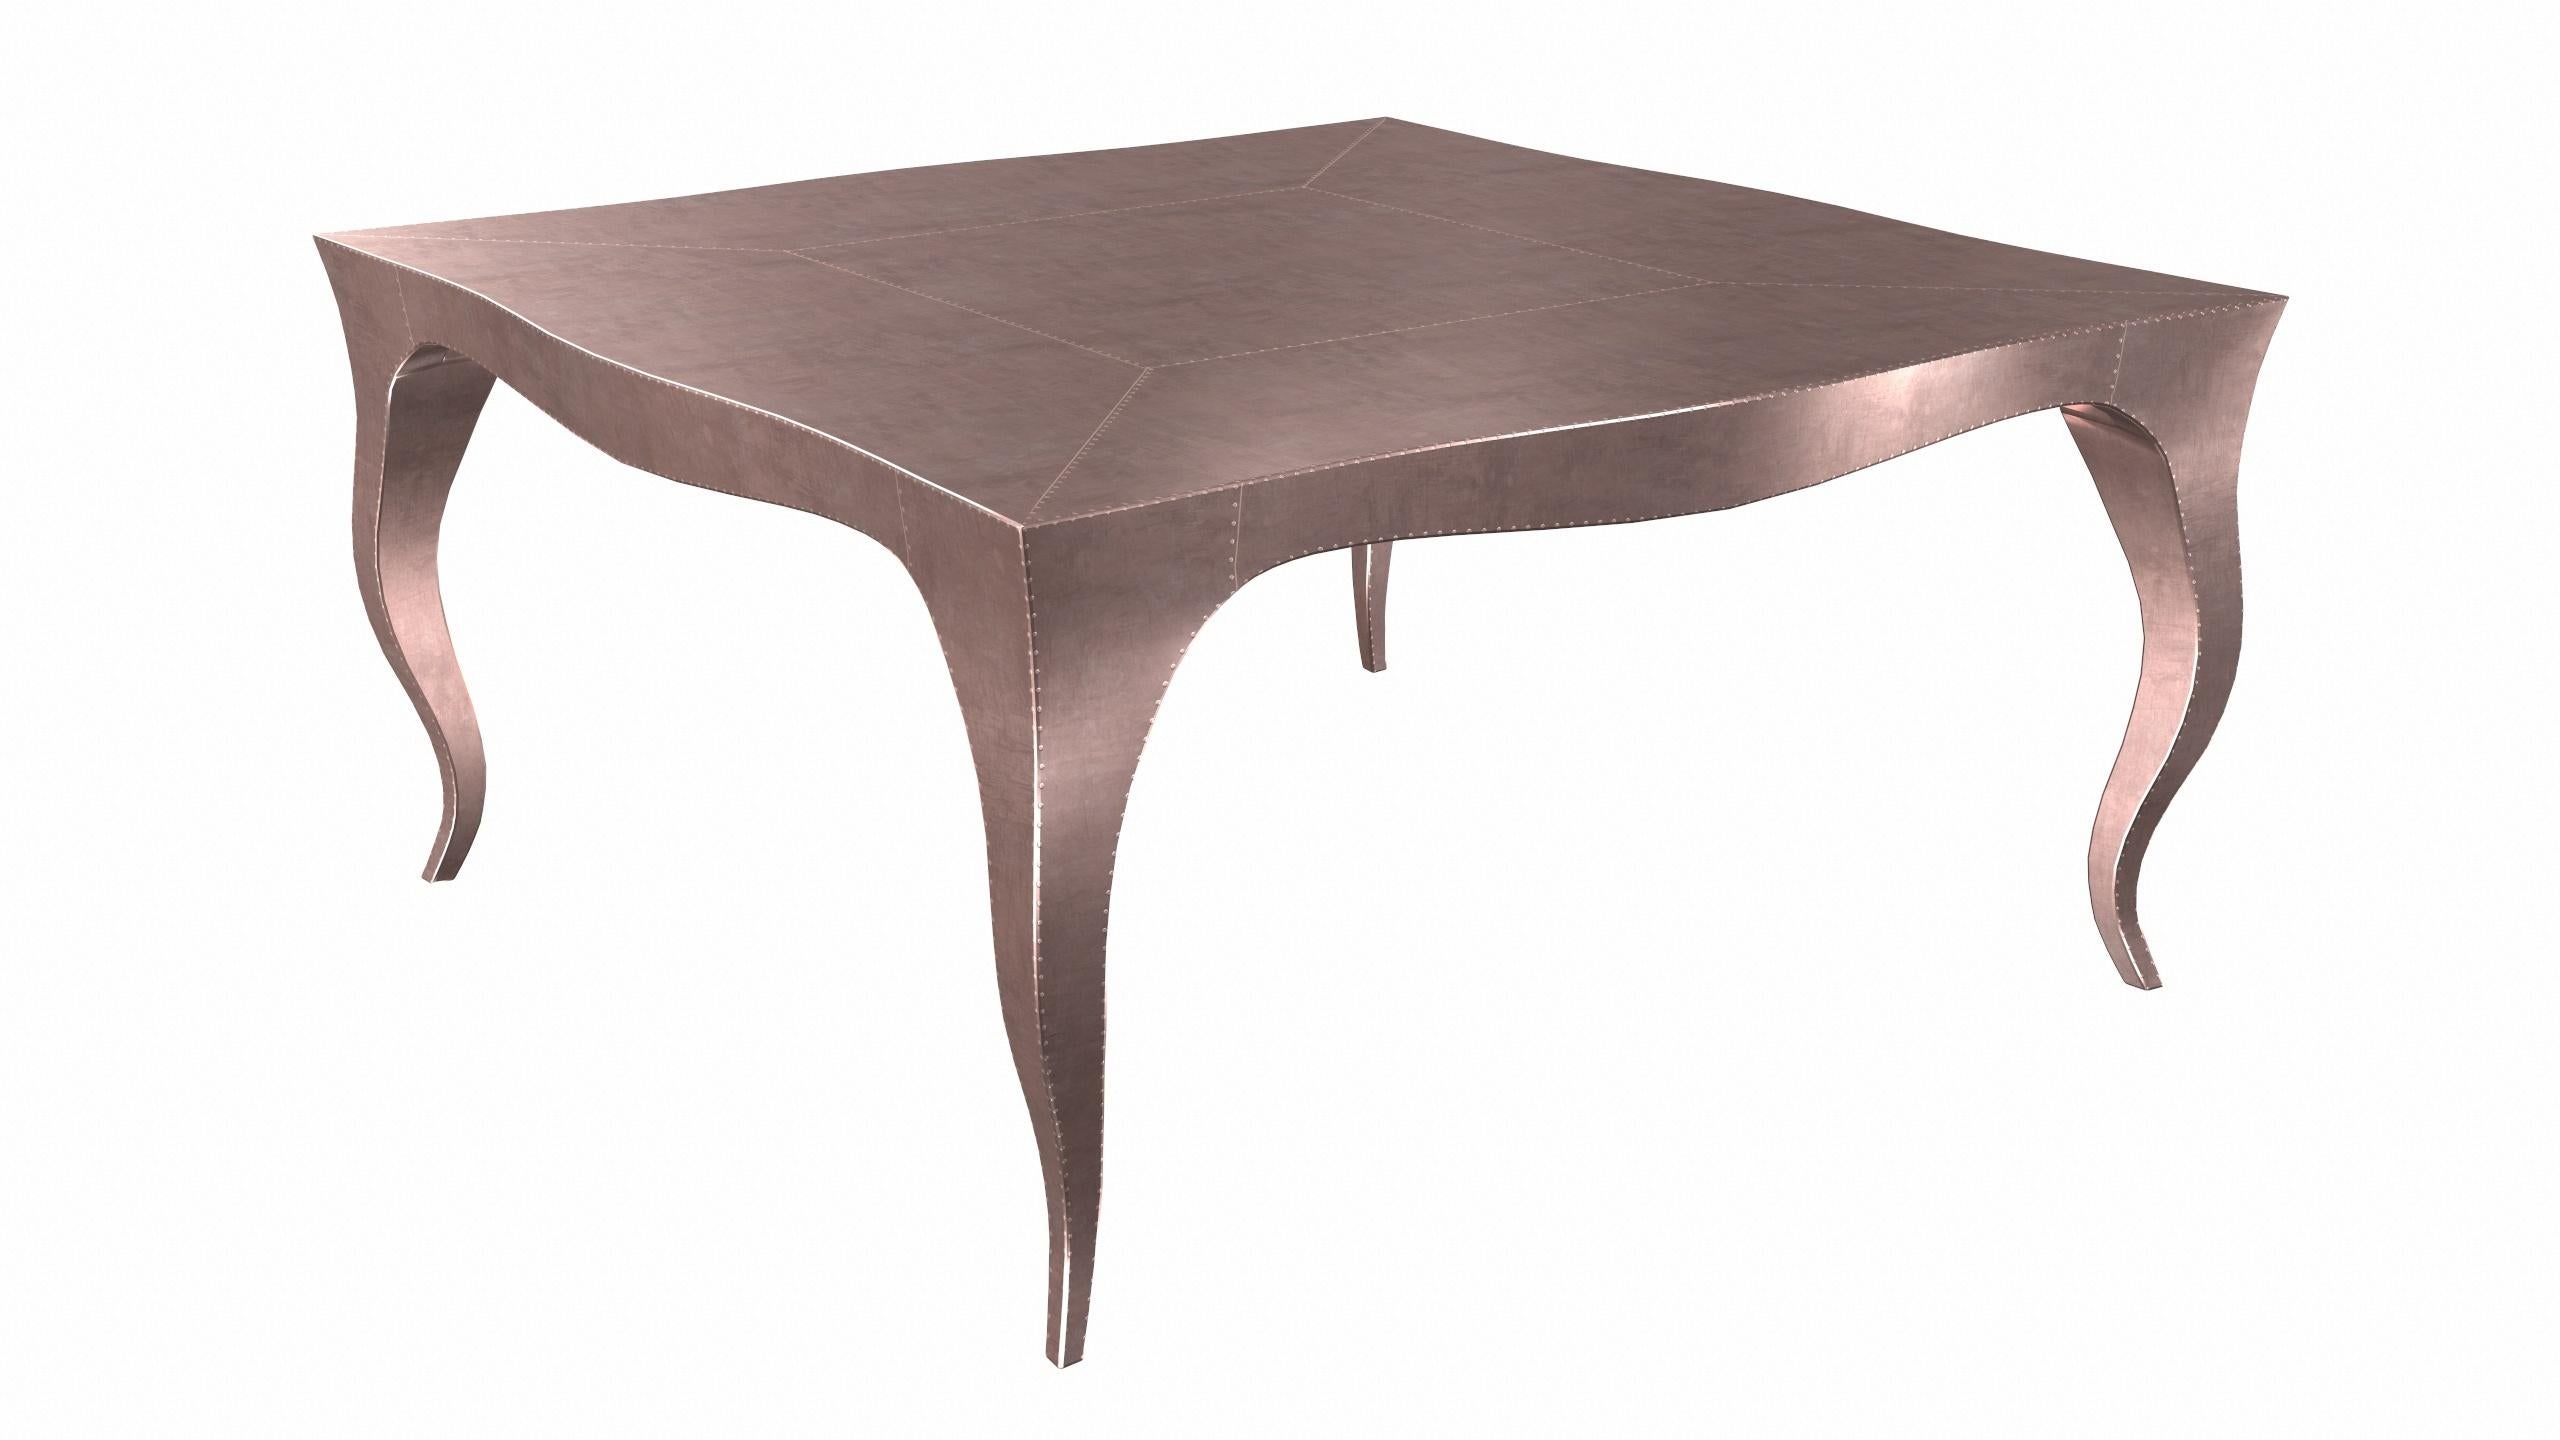 Metal Louise Art Deco Center Tables Smooth Copper 18.5x18.5x10 inch by Paul Mathieu For Sale